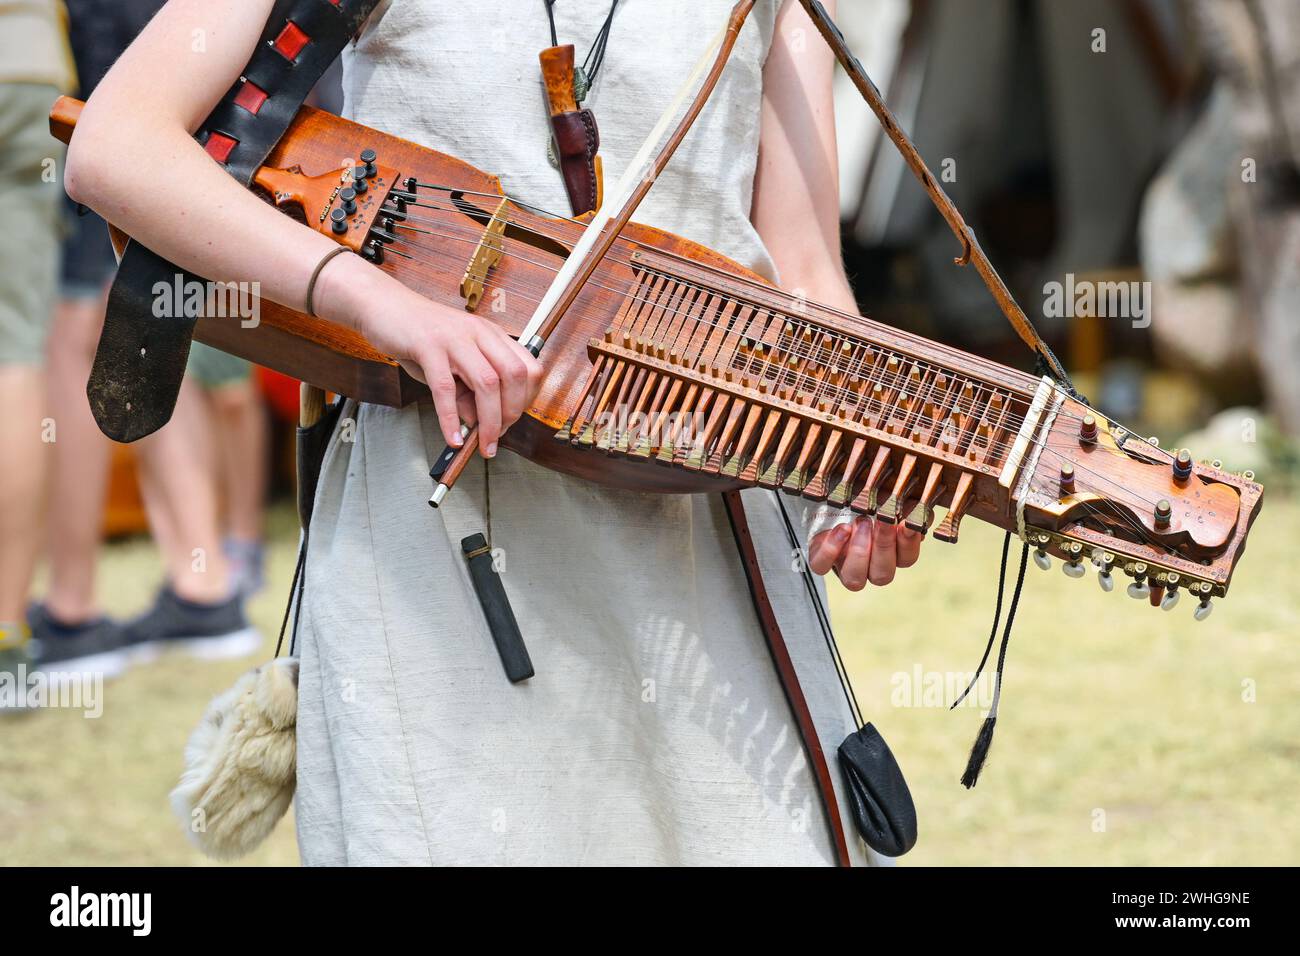 Nyckelharpa, keyed fiddle, a traditional Swedish musical instrument, string instrument or chordophone played by a young woman at Stock Photo